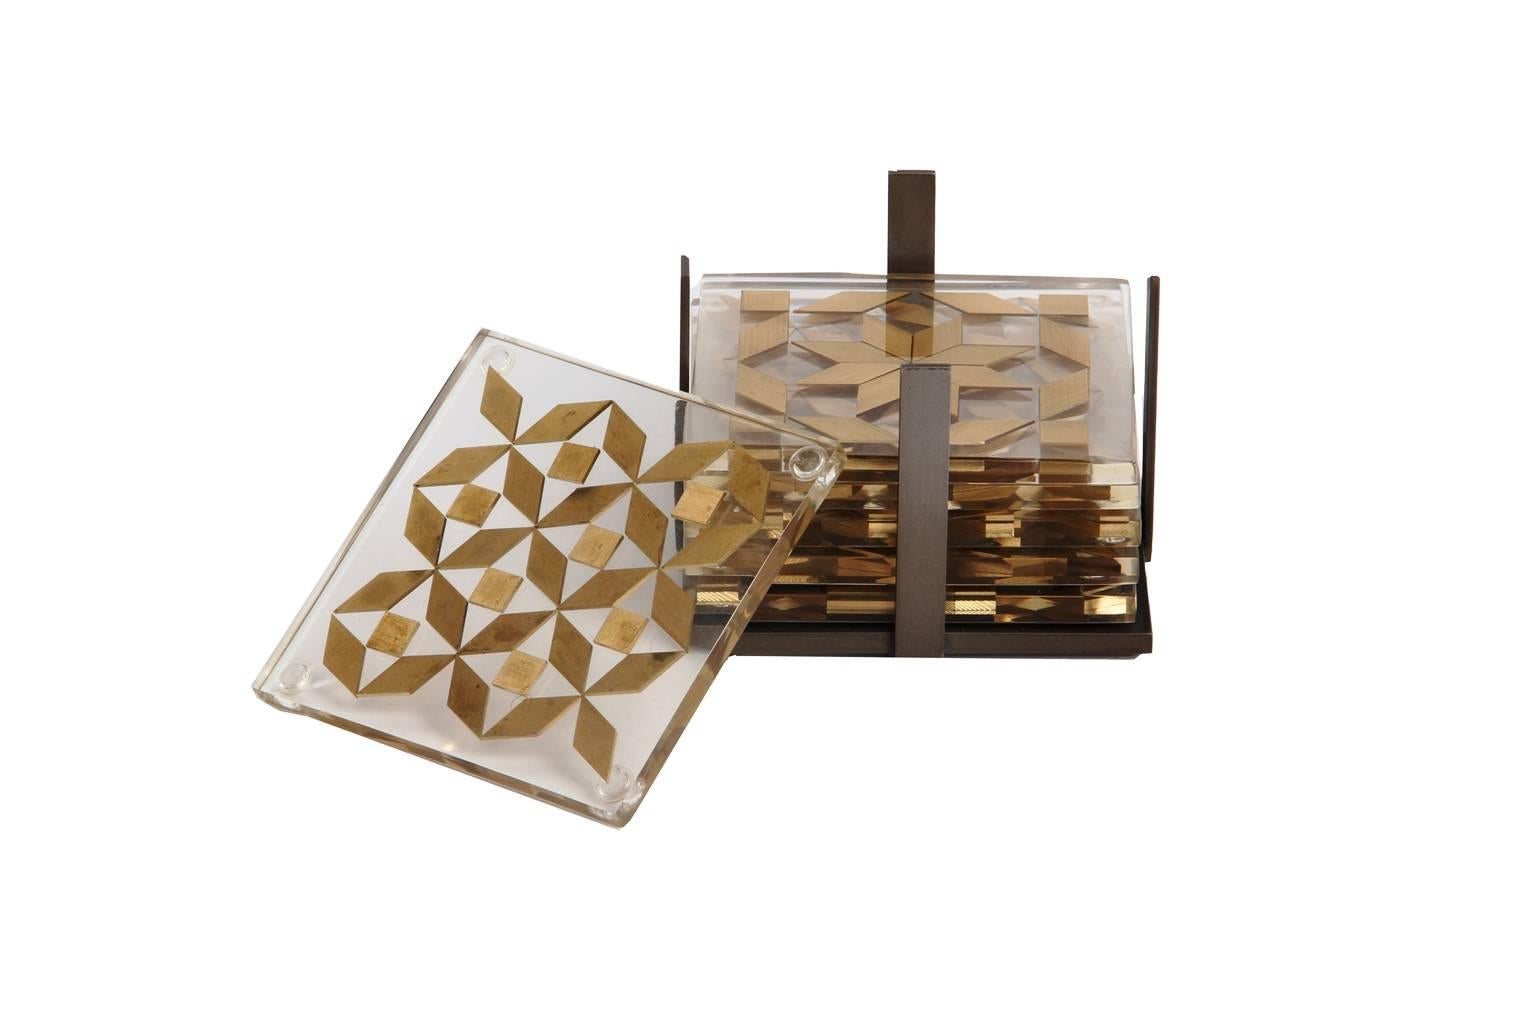 The clear coaster collection celebrates transparency through the use of modern techniques and materials such as resin, while inlaying it with brass elements through the ancient technique of marquetry.
Dimensions: W 9 x D 9 x H 0.6 cm
The clear